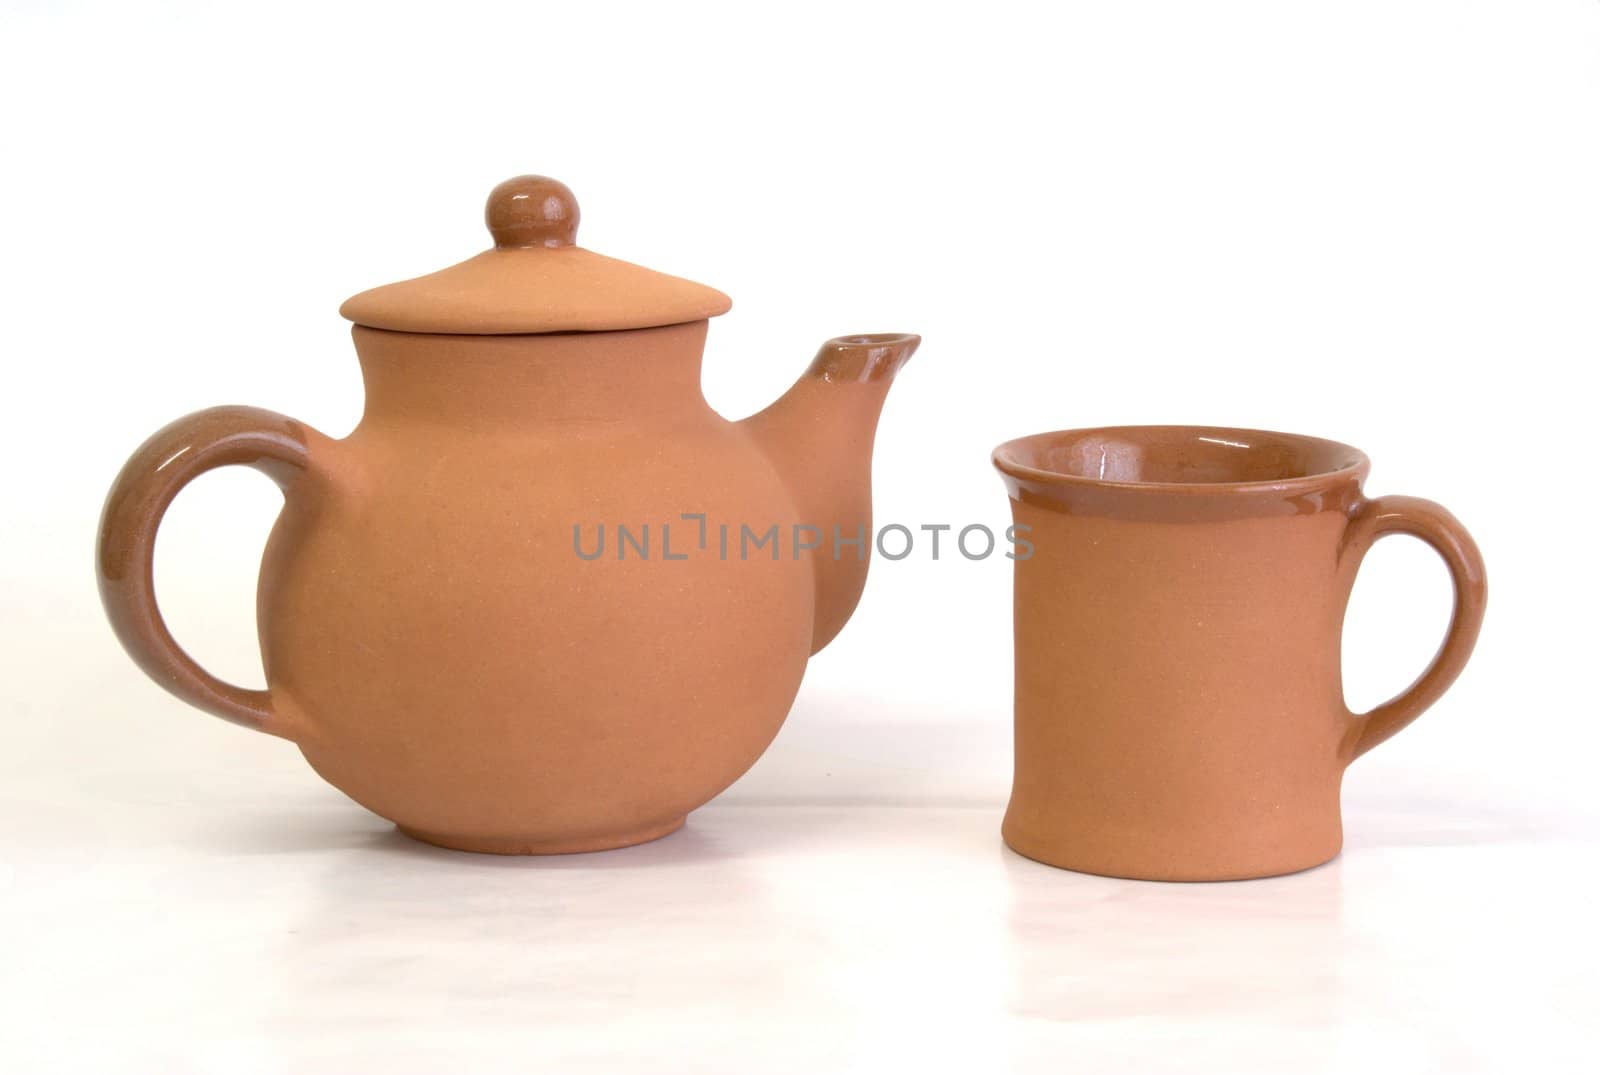 Teapot and cup on white background